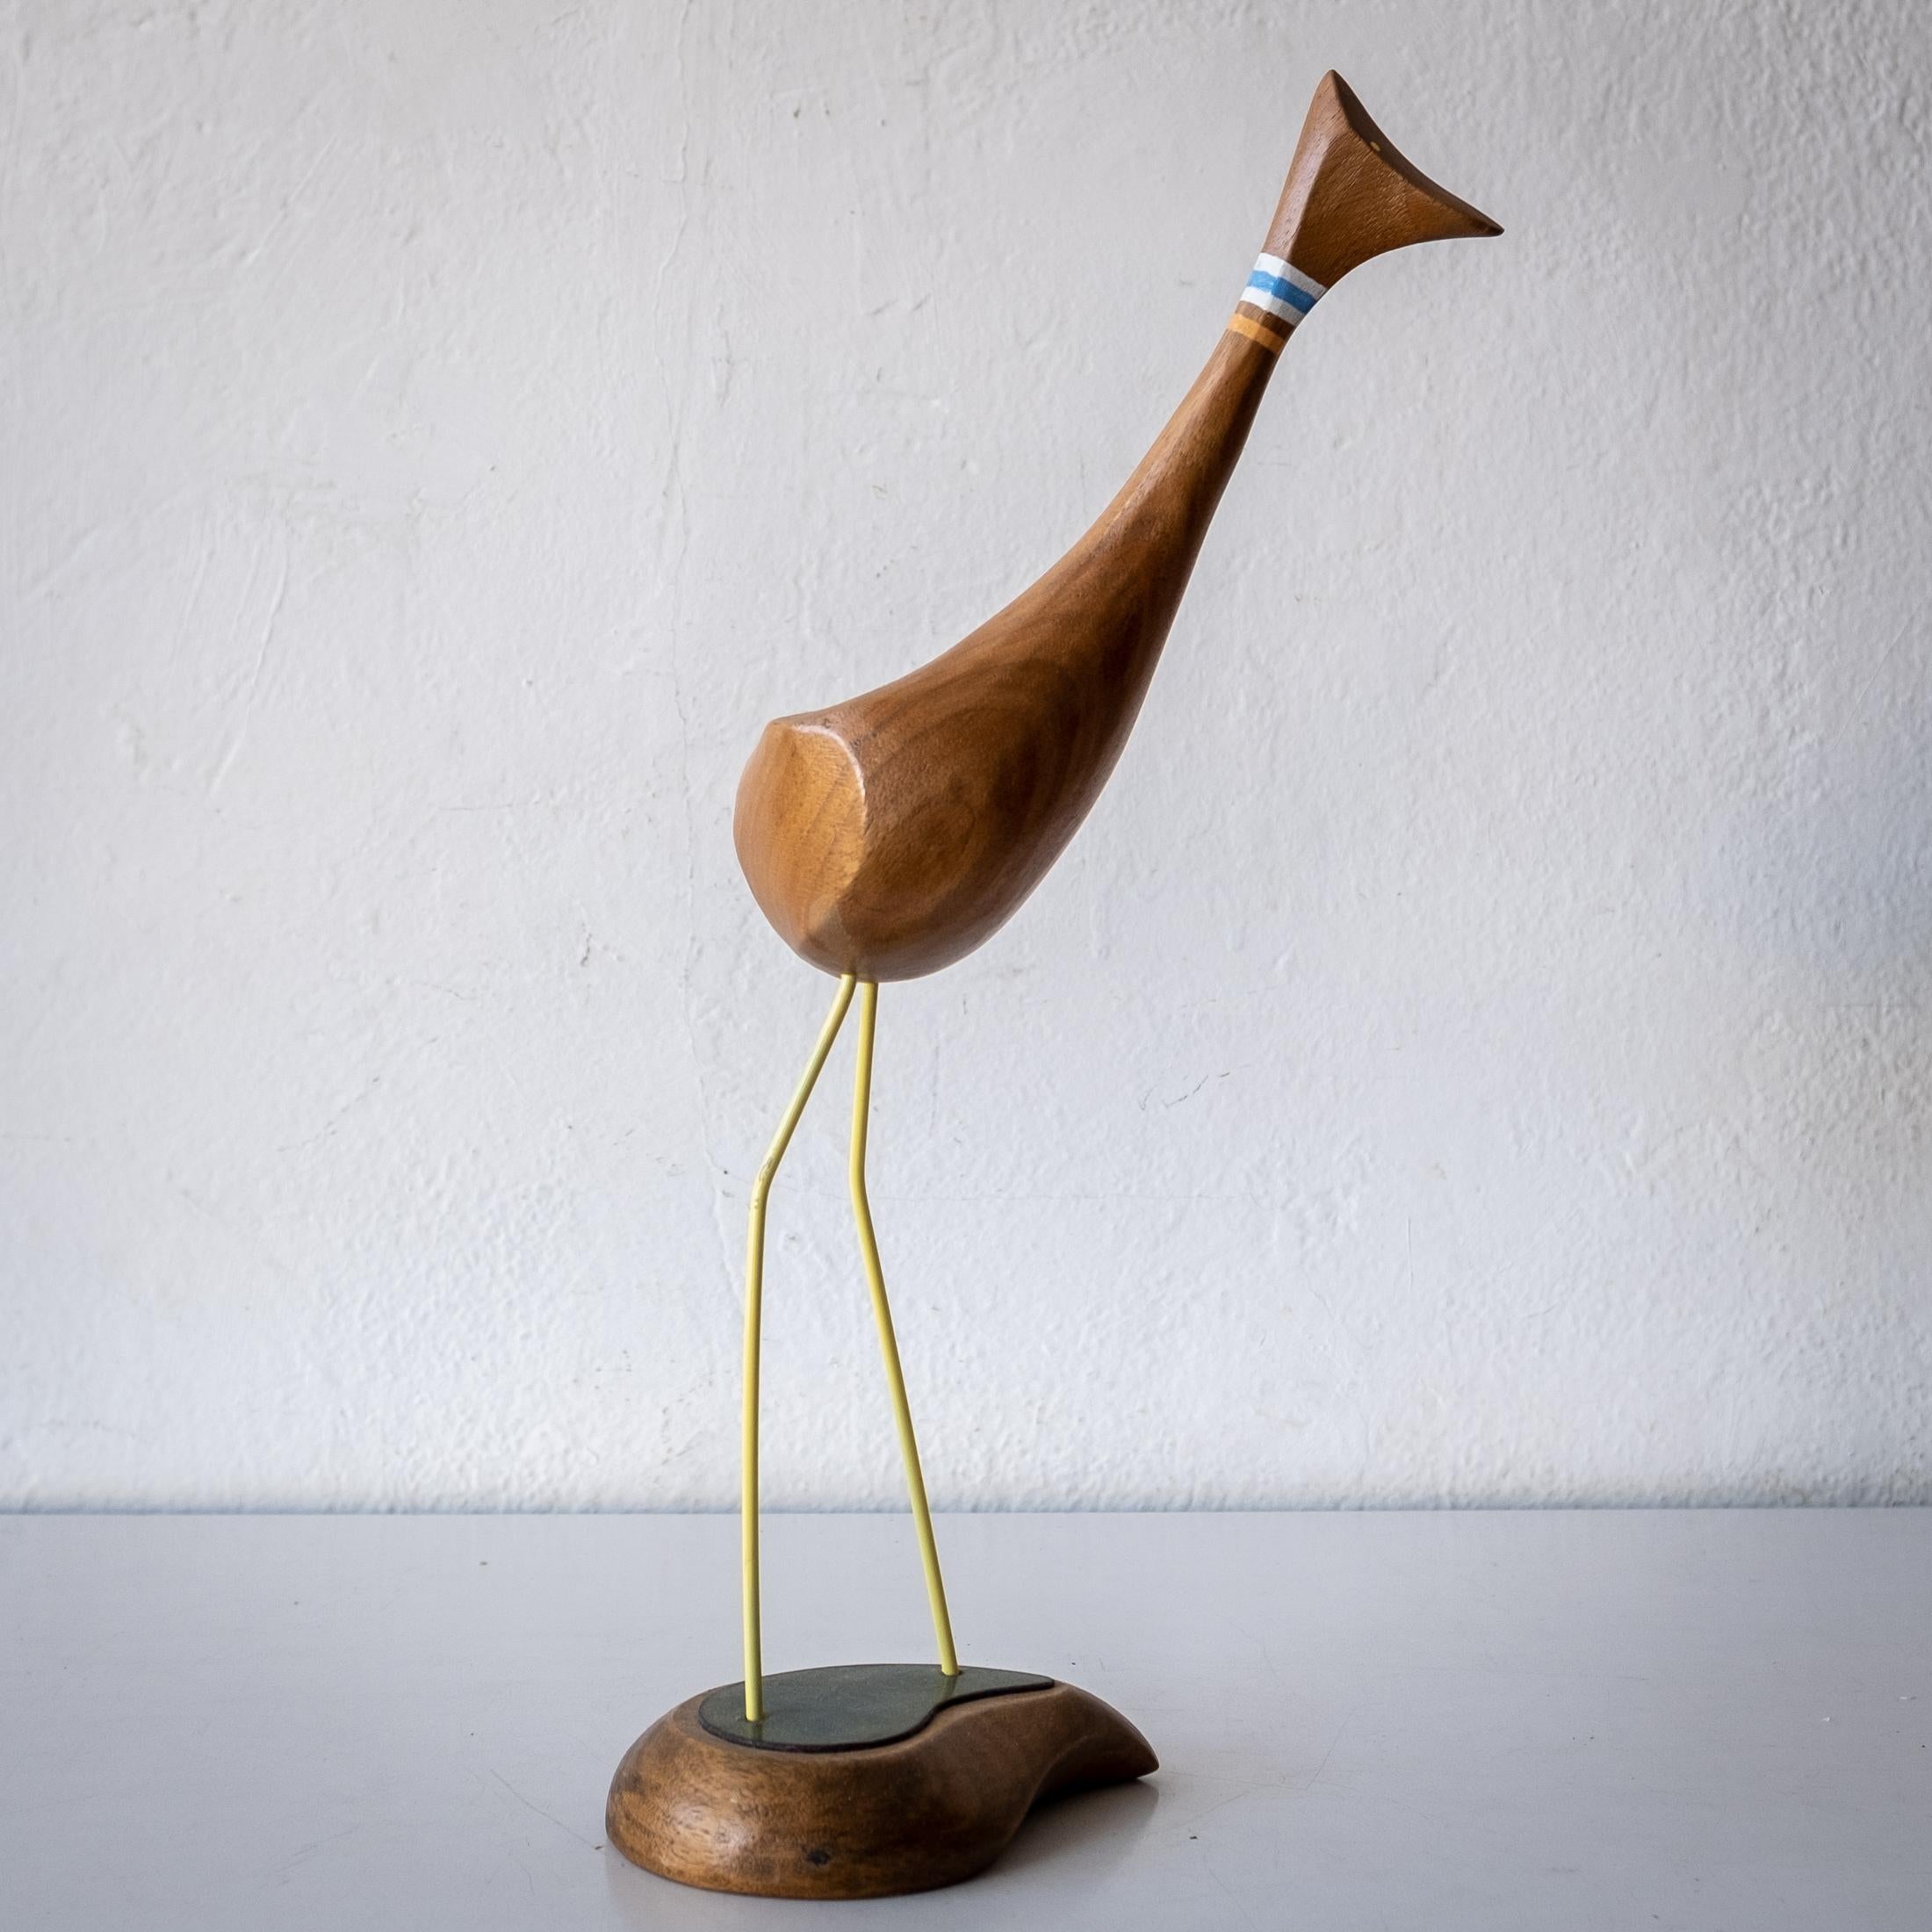 Abstract bird sculpture by artist Val Robbins (1925-2009). Executed at his Rimrock Pennsylvania studio. Wood form on metal legs. The enamel is by his wife Mae Robbins. This was purchased directly from the artist's estate. Signed on the base. USA,